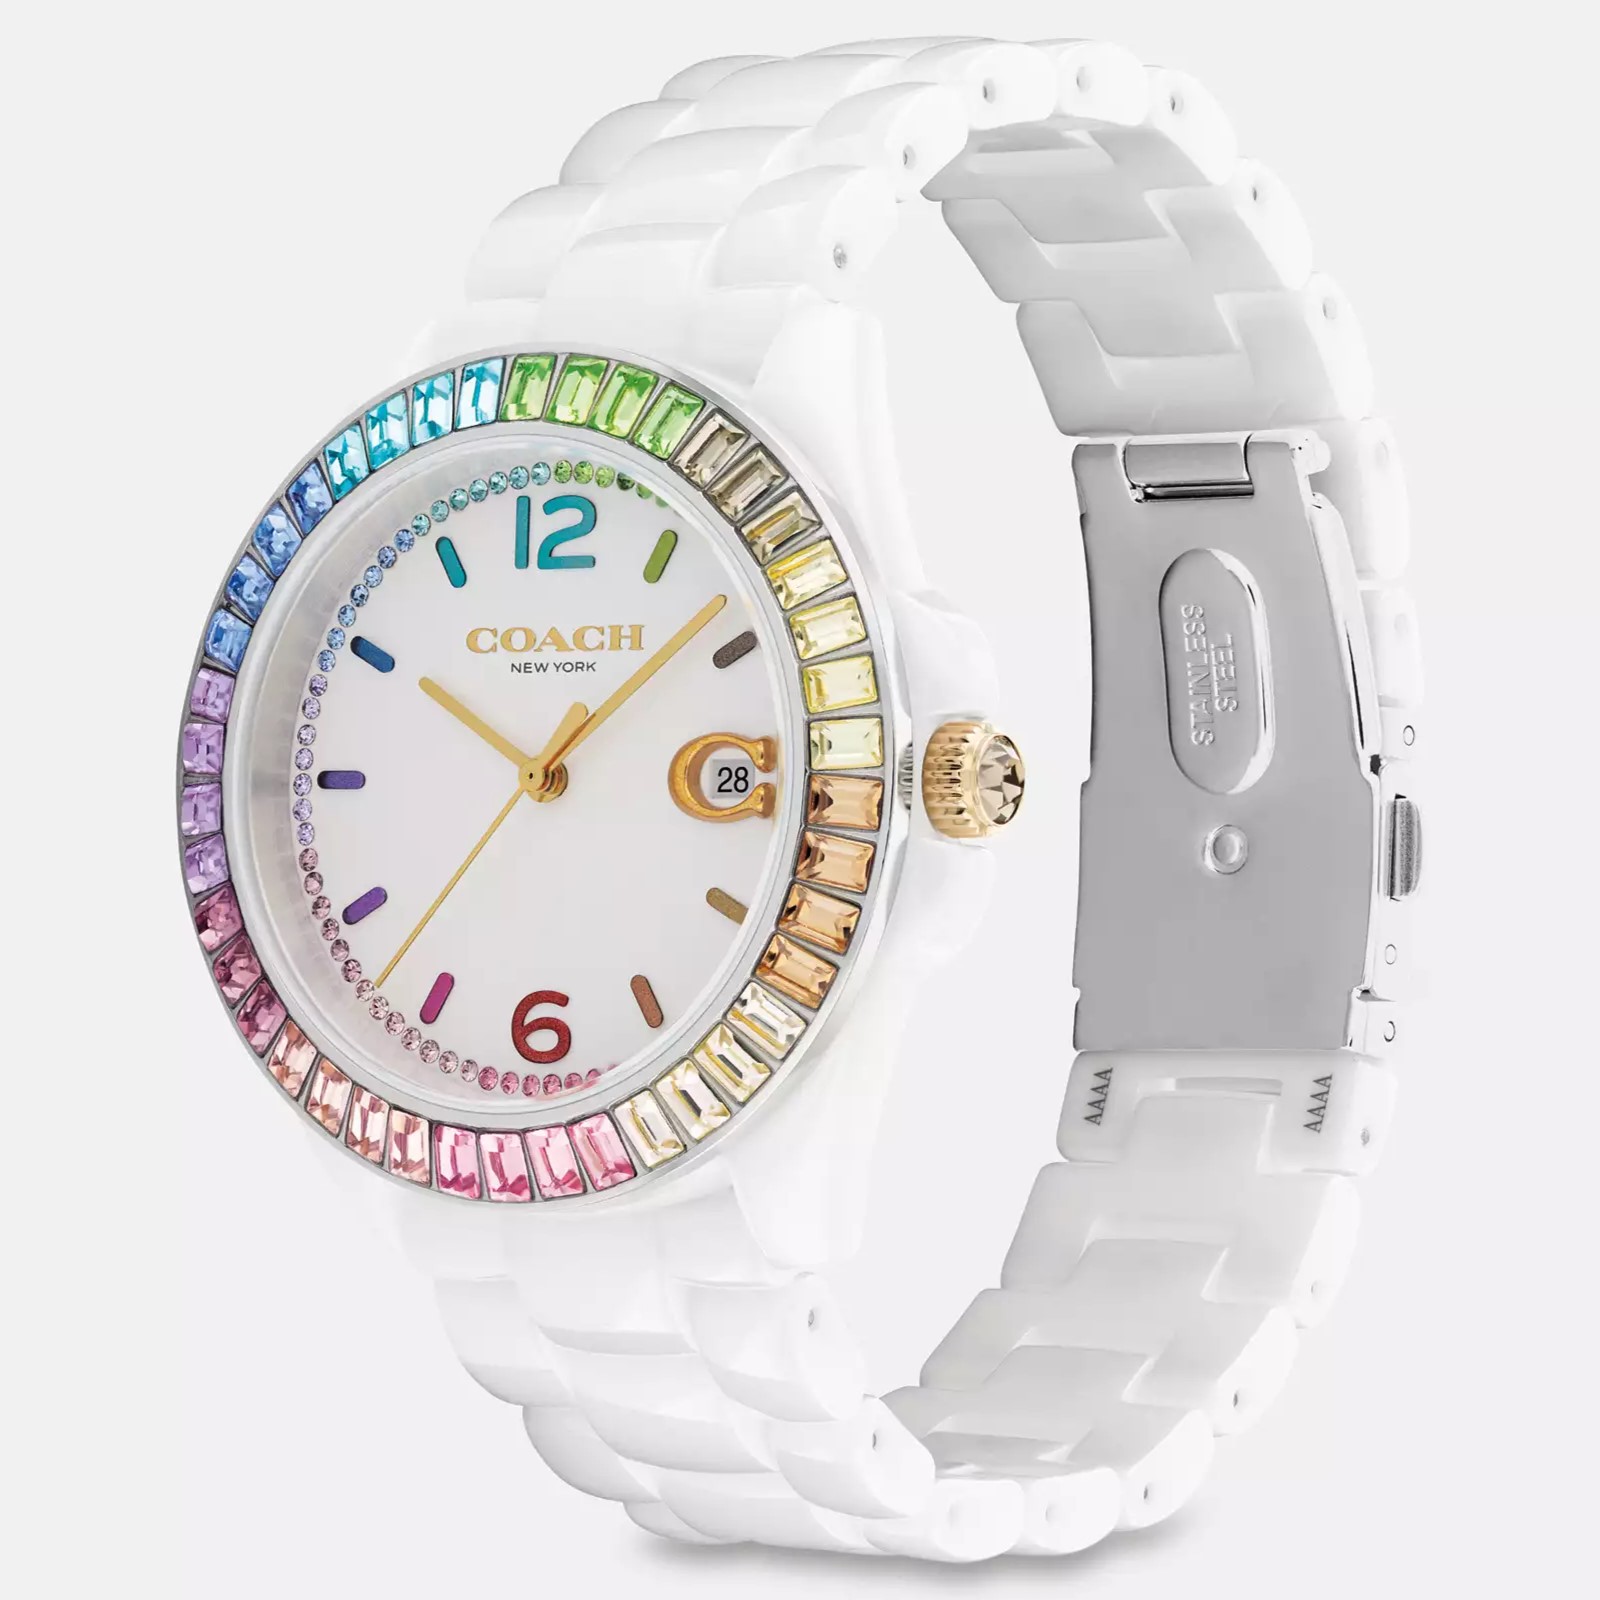 ĐỒNG HỒ ĐEO TAY NỮ COACH LADIES GREYSON MULTI-COLOR CRYSTAL ACCENT RAINBOW BEZEL WHITE CERAMIC WATCH 14504019 4